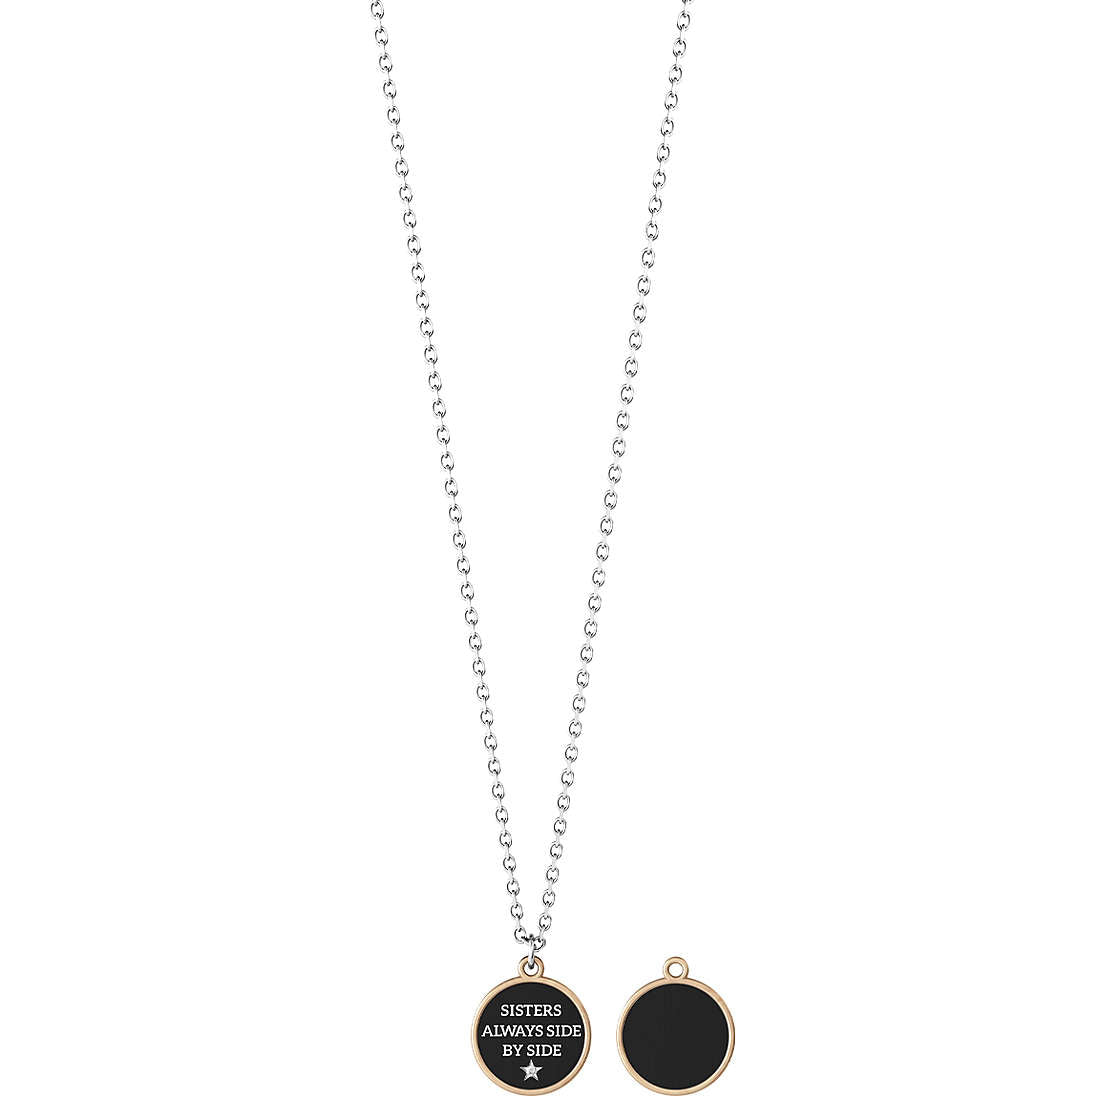 Kidult Family collection women's necklace - SISTERS ALWAYS SIDE BY SIDE - 751217